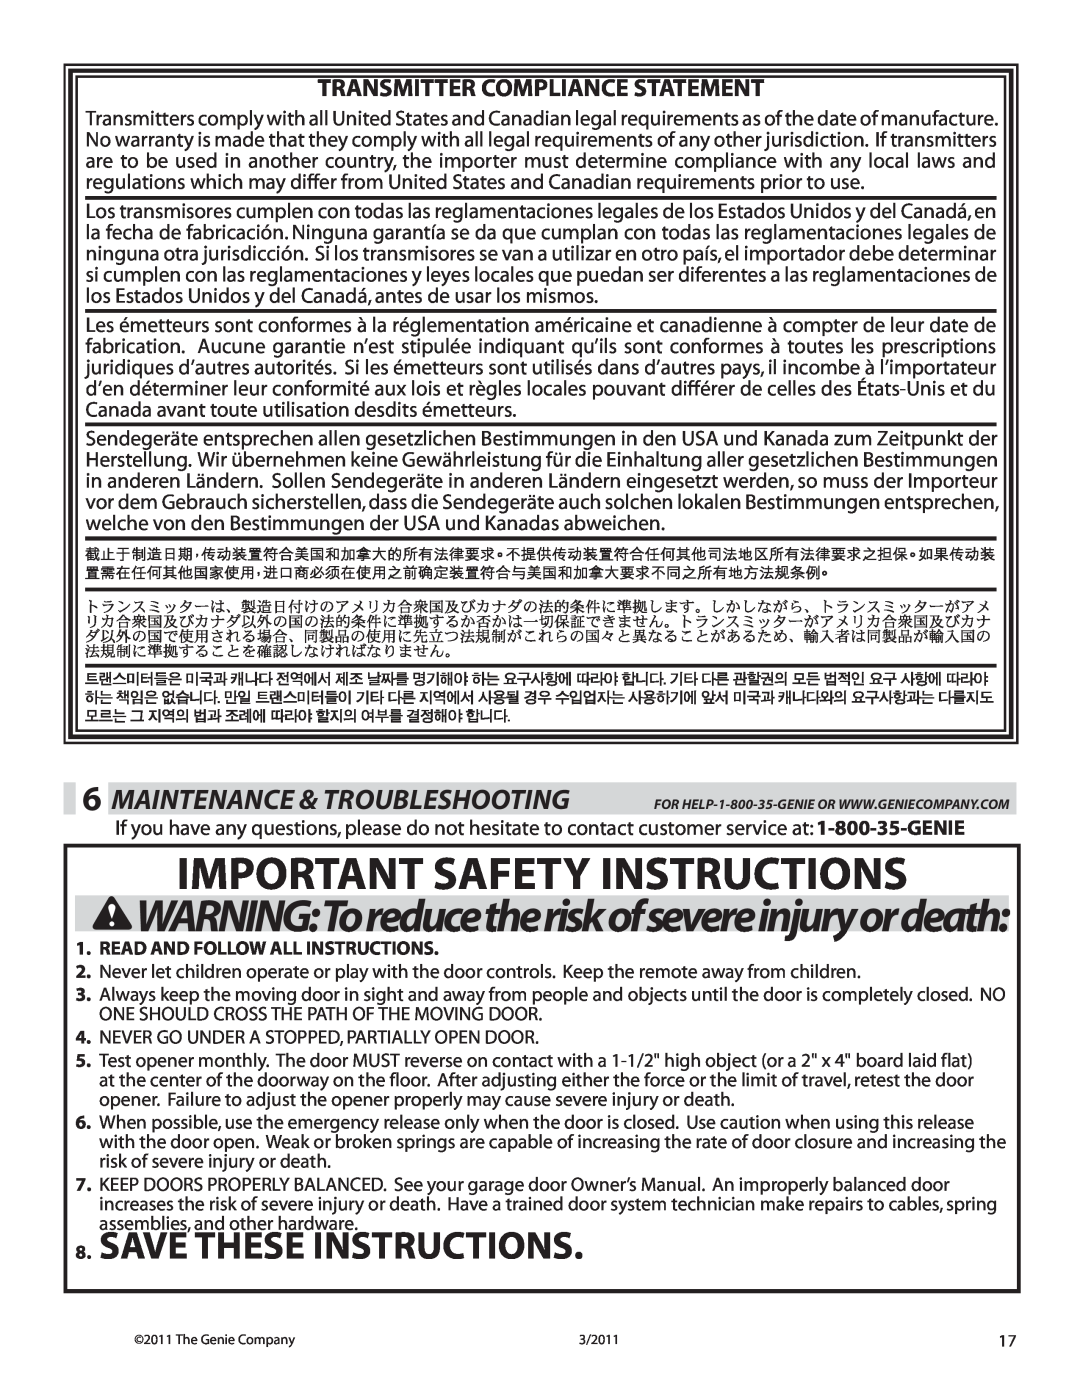 Genie 4042 manual Important Safety Instructions, Save These Instructions, Maintenance & Troubleshooting 